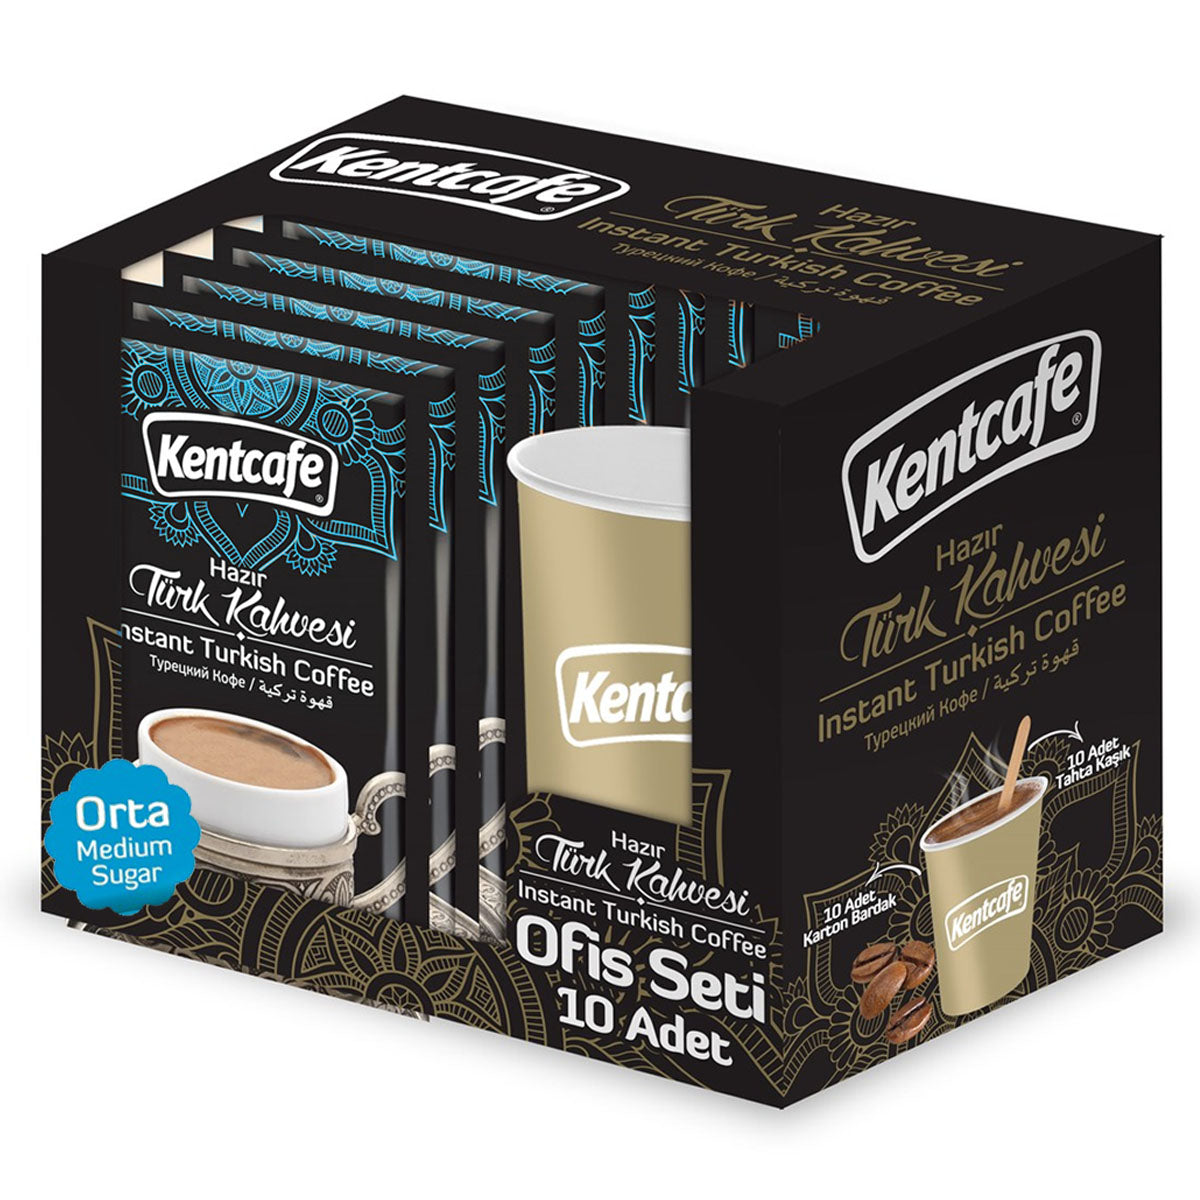 Kentcafe - Instant Turkish Coffee with Medium Sugar (Disposable Cup Set) - 10x9g - Continental Food Store